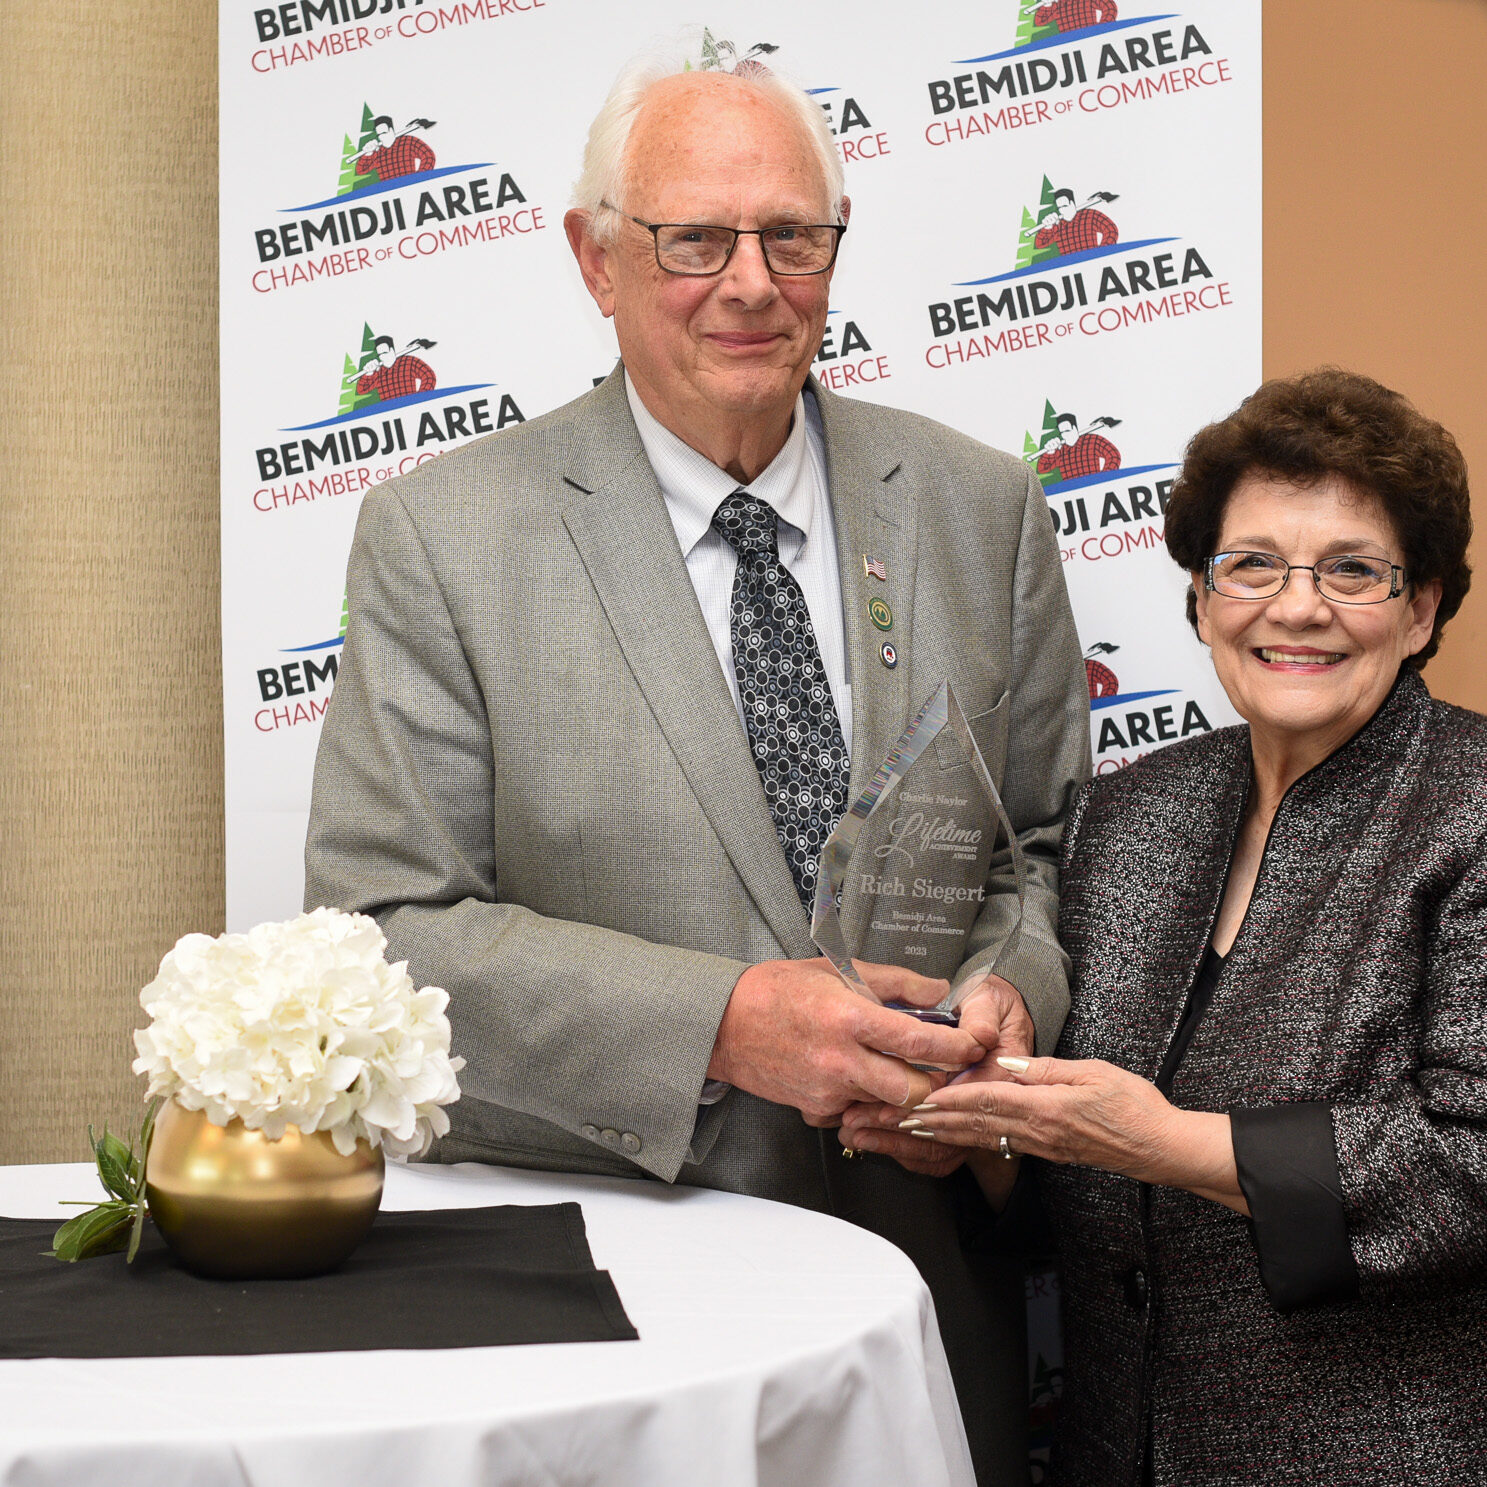 Rich Siegert was the recipient of the Charlie Naylor Lifetime Achievement Award during the 18th Annual Awards of Excellence, held on May 23, 2023, at the Hampton Inn &amp; Suites. He is pictured with his wife, Joyce.